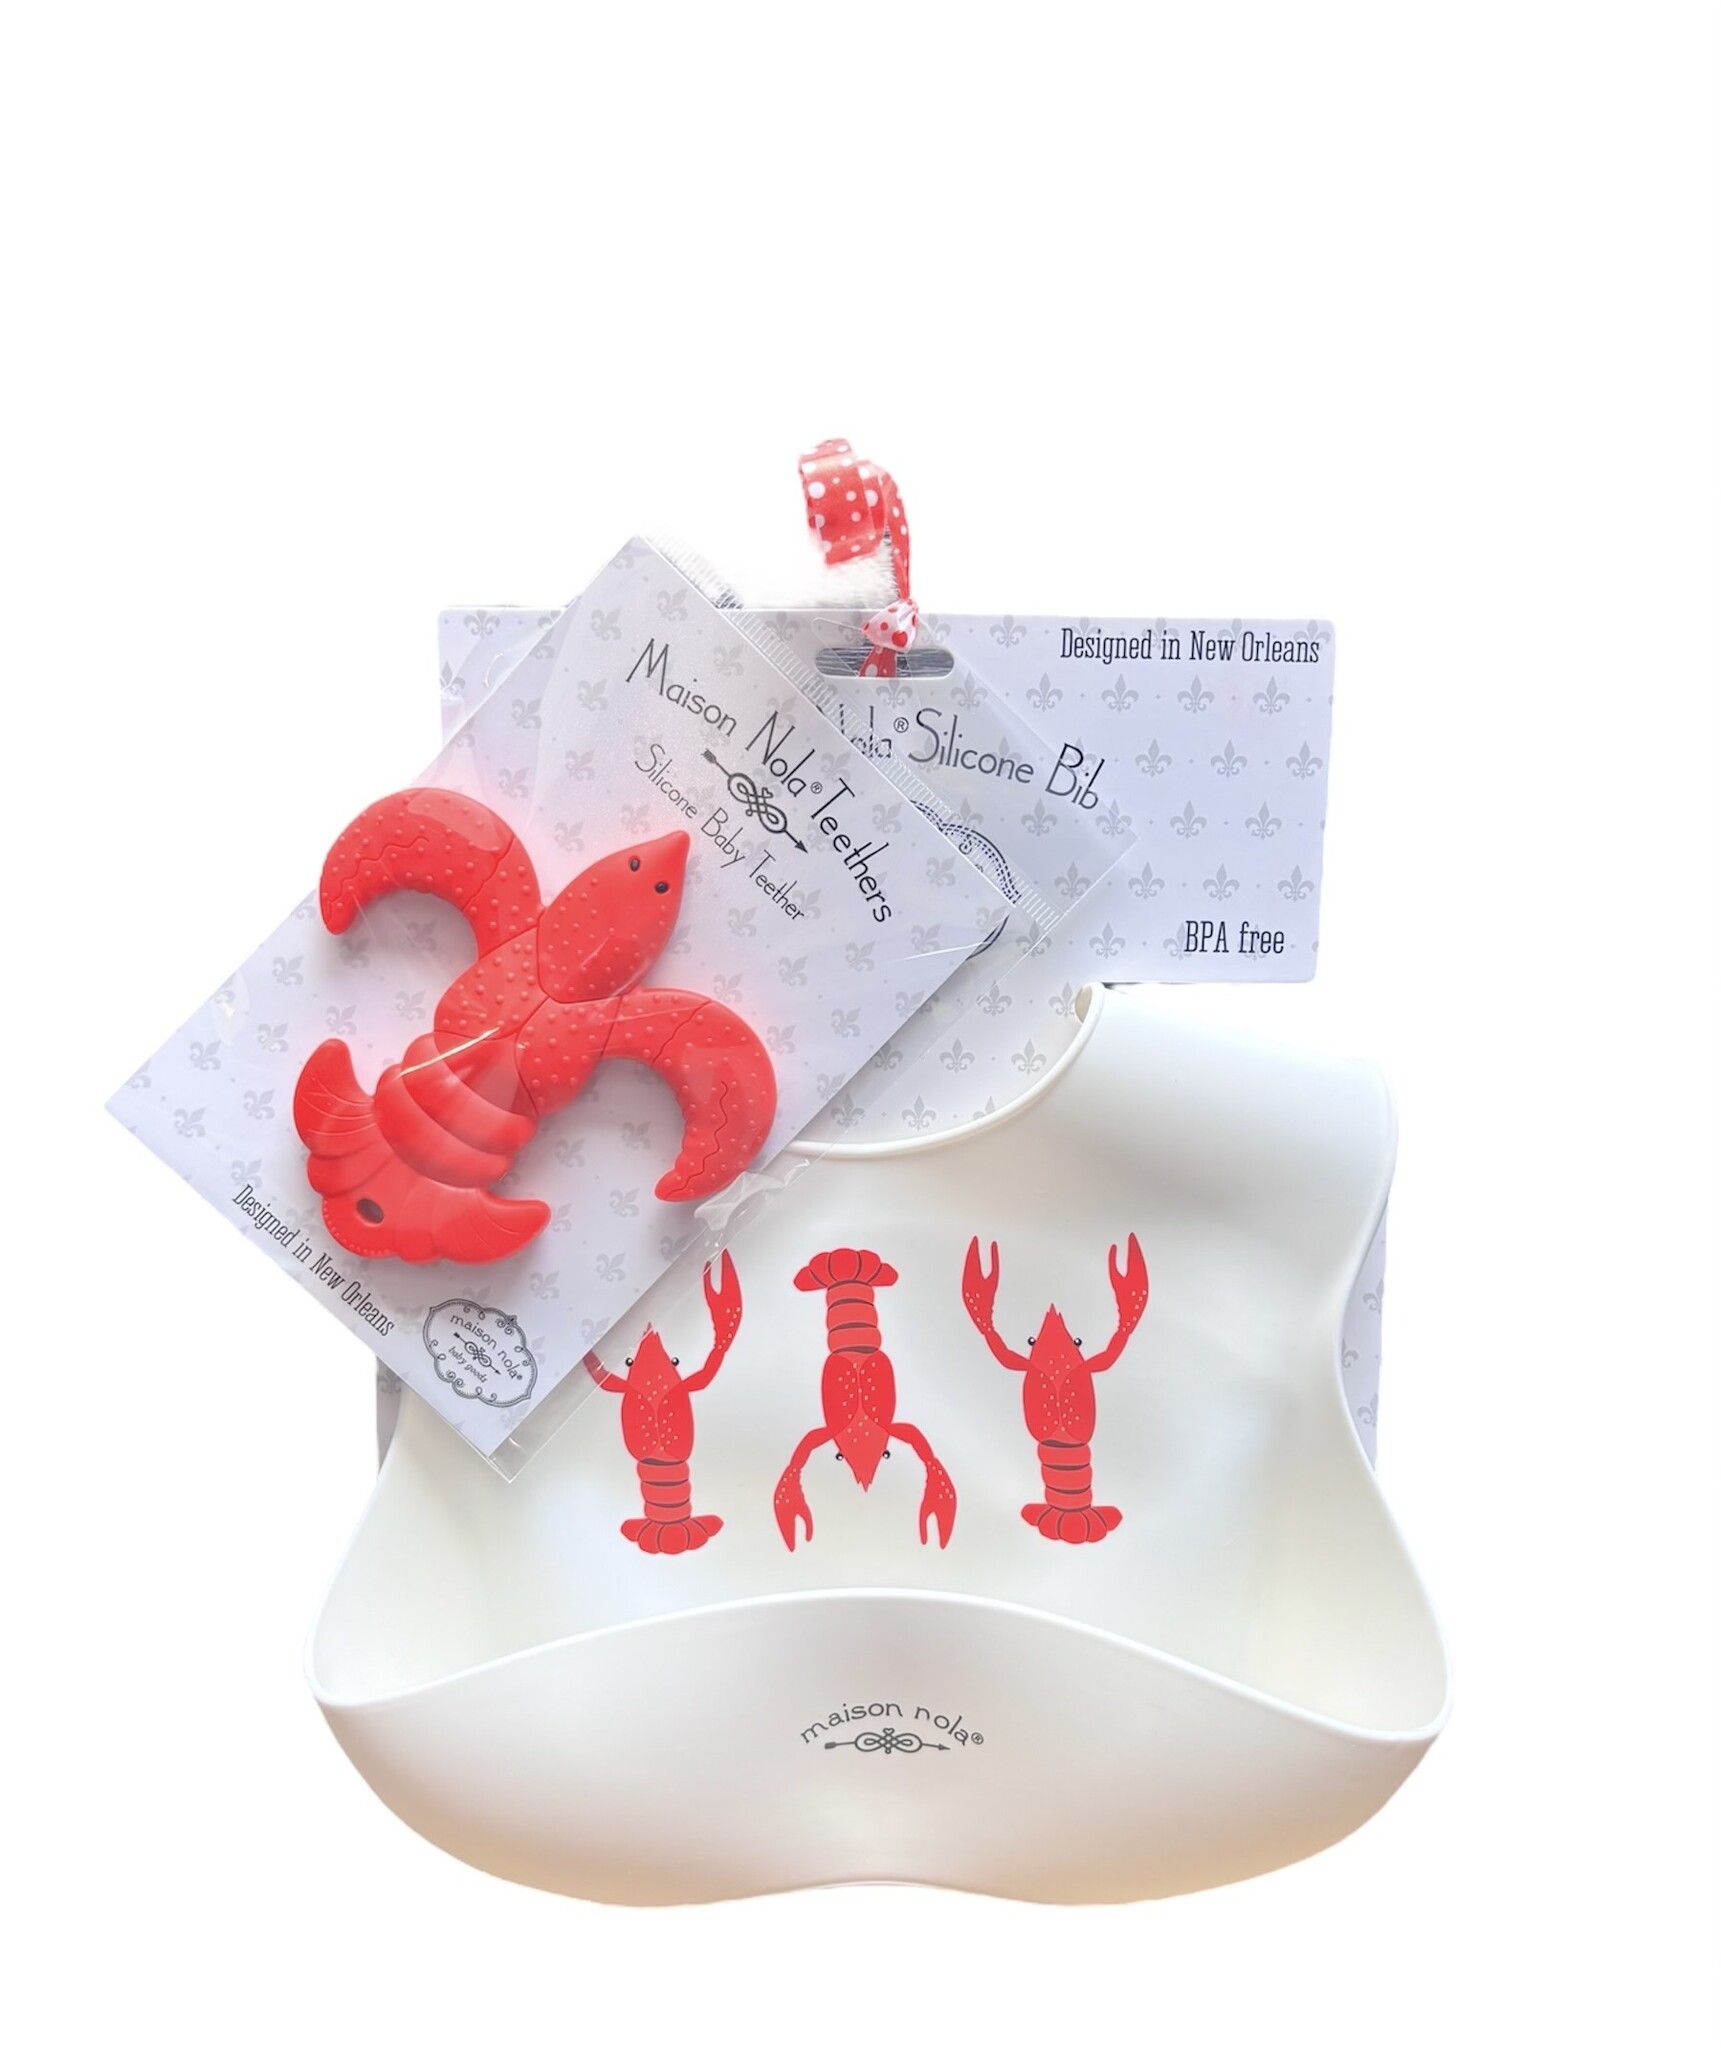 Maison Nola Baby's First Boil Gift Bundle | Silicone Bucket Bib and Teether